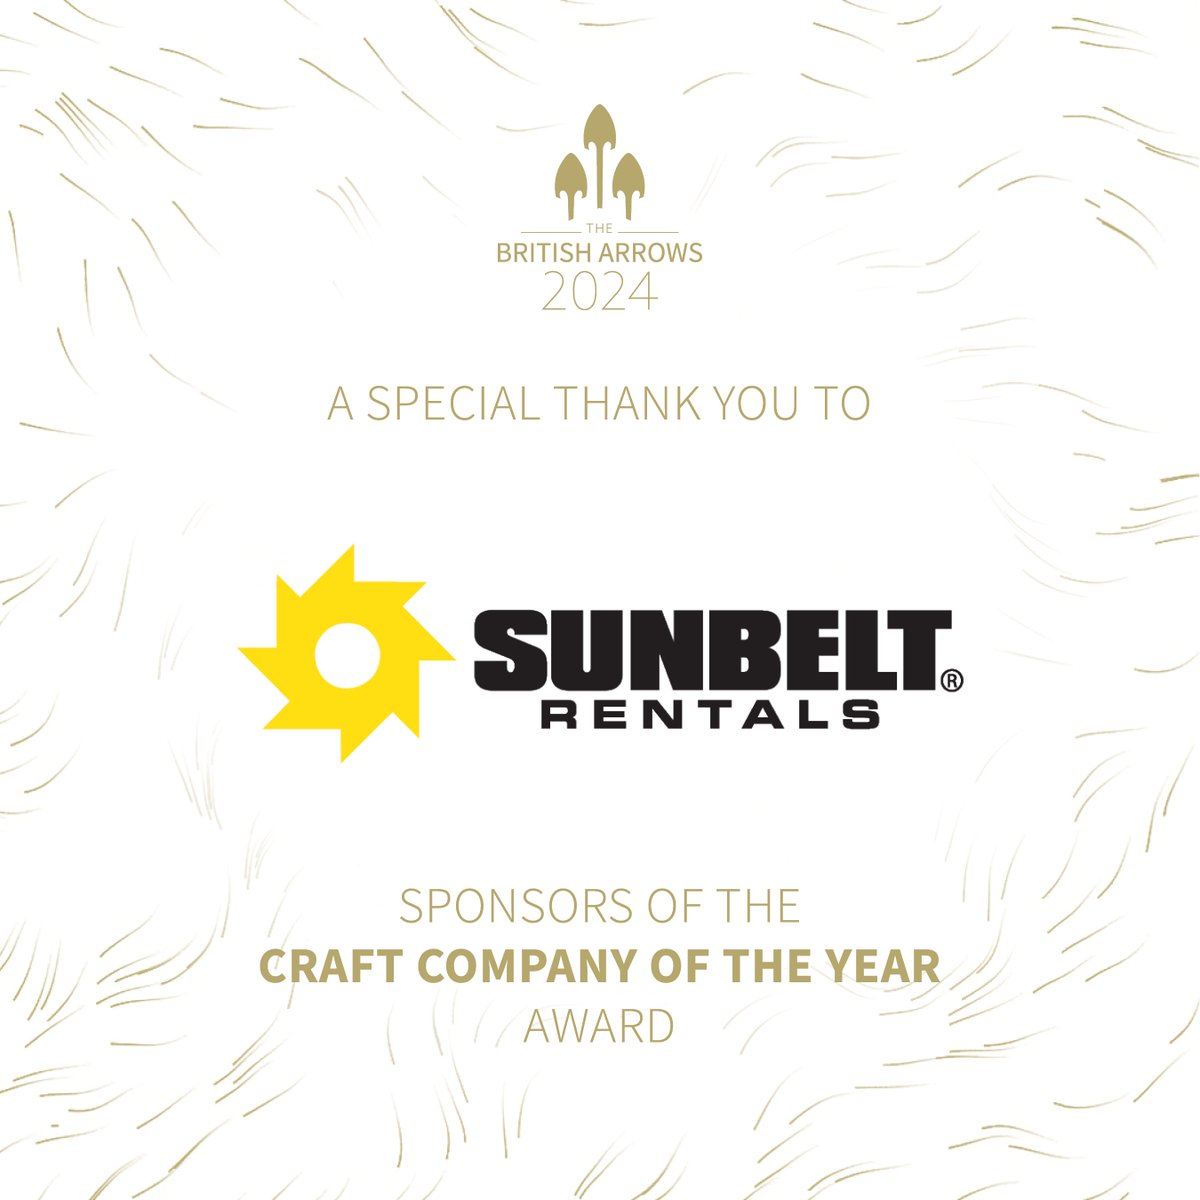 A special thank you to Sunbelt Rentals Sponsors of the Craft Company of the Year Award #BA23 #BA23 #BritishArrows #advertising #award #celebration